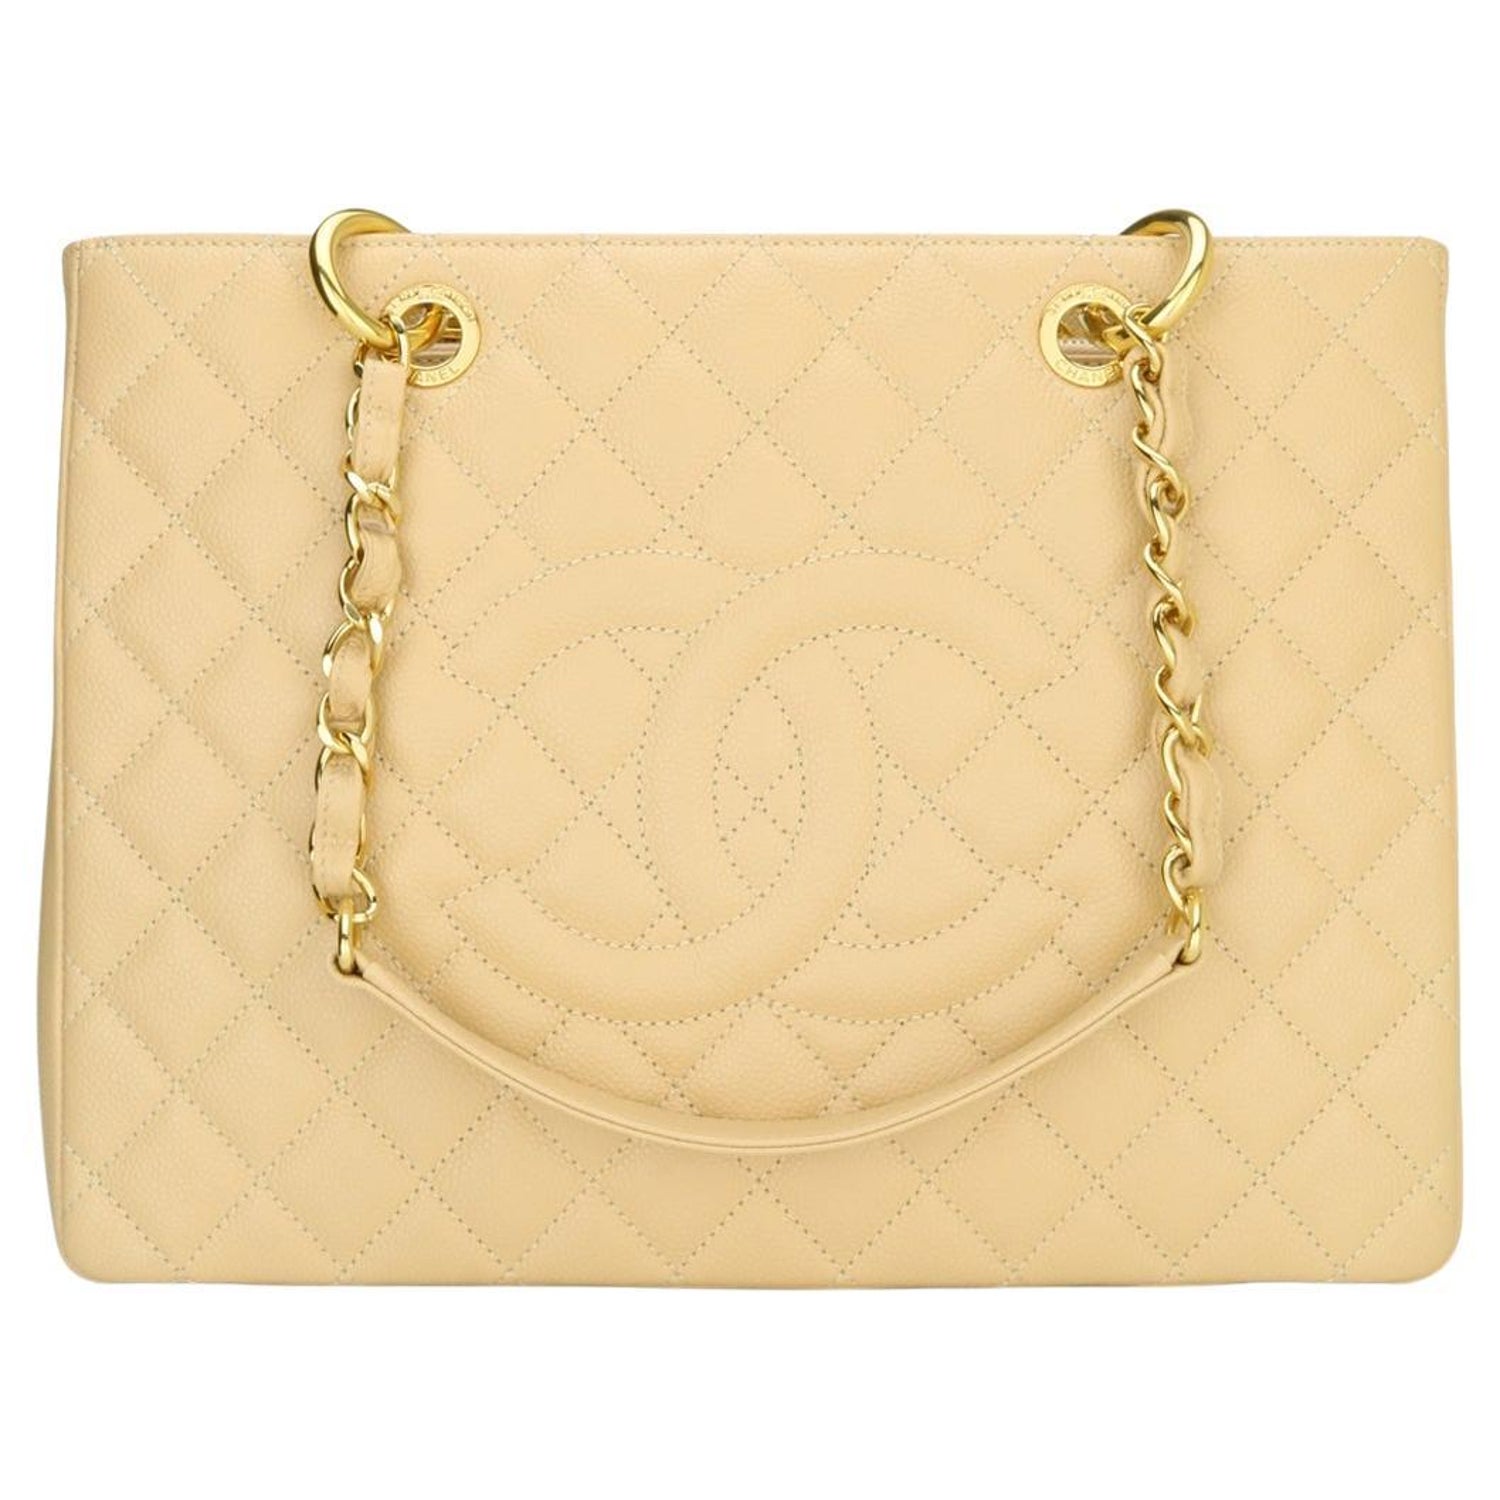 CHANEL Grand Shopping Tote (GST) Bag Beige Caviar with Gold Hardware 2012